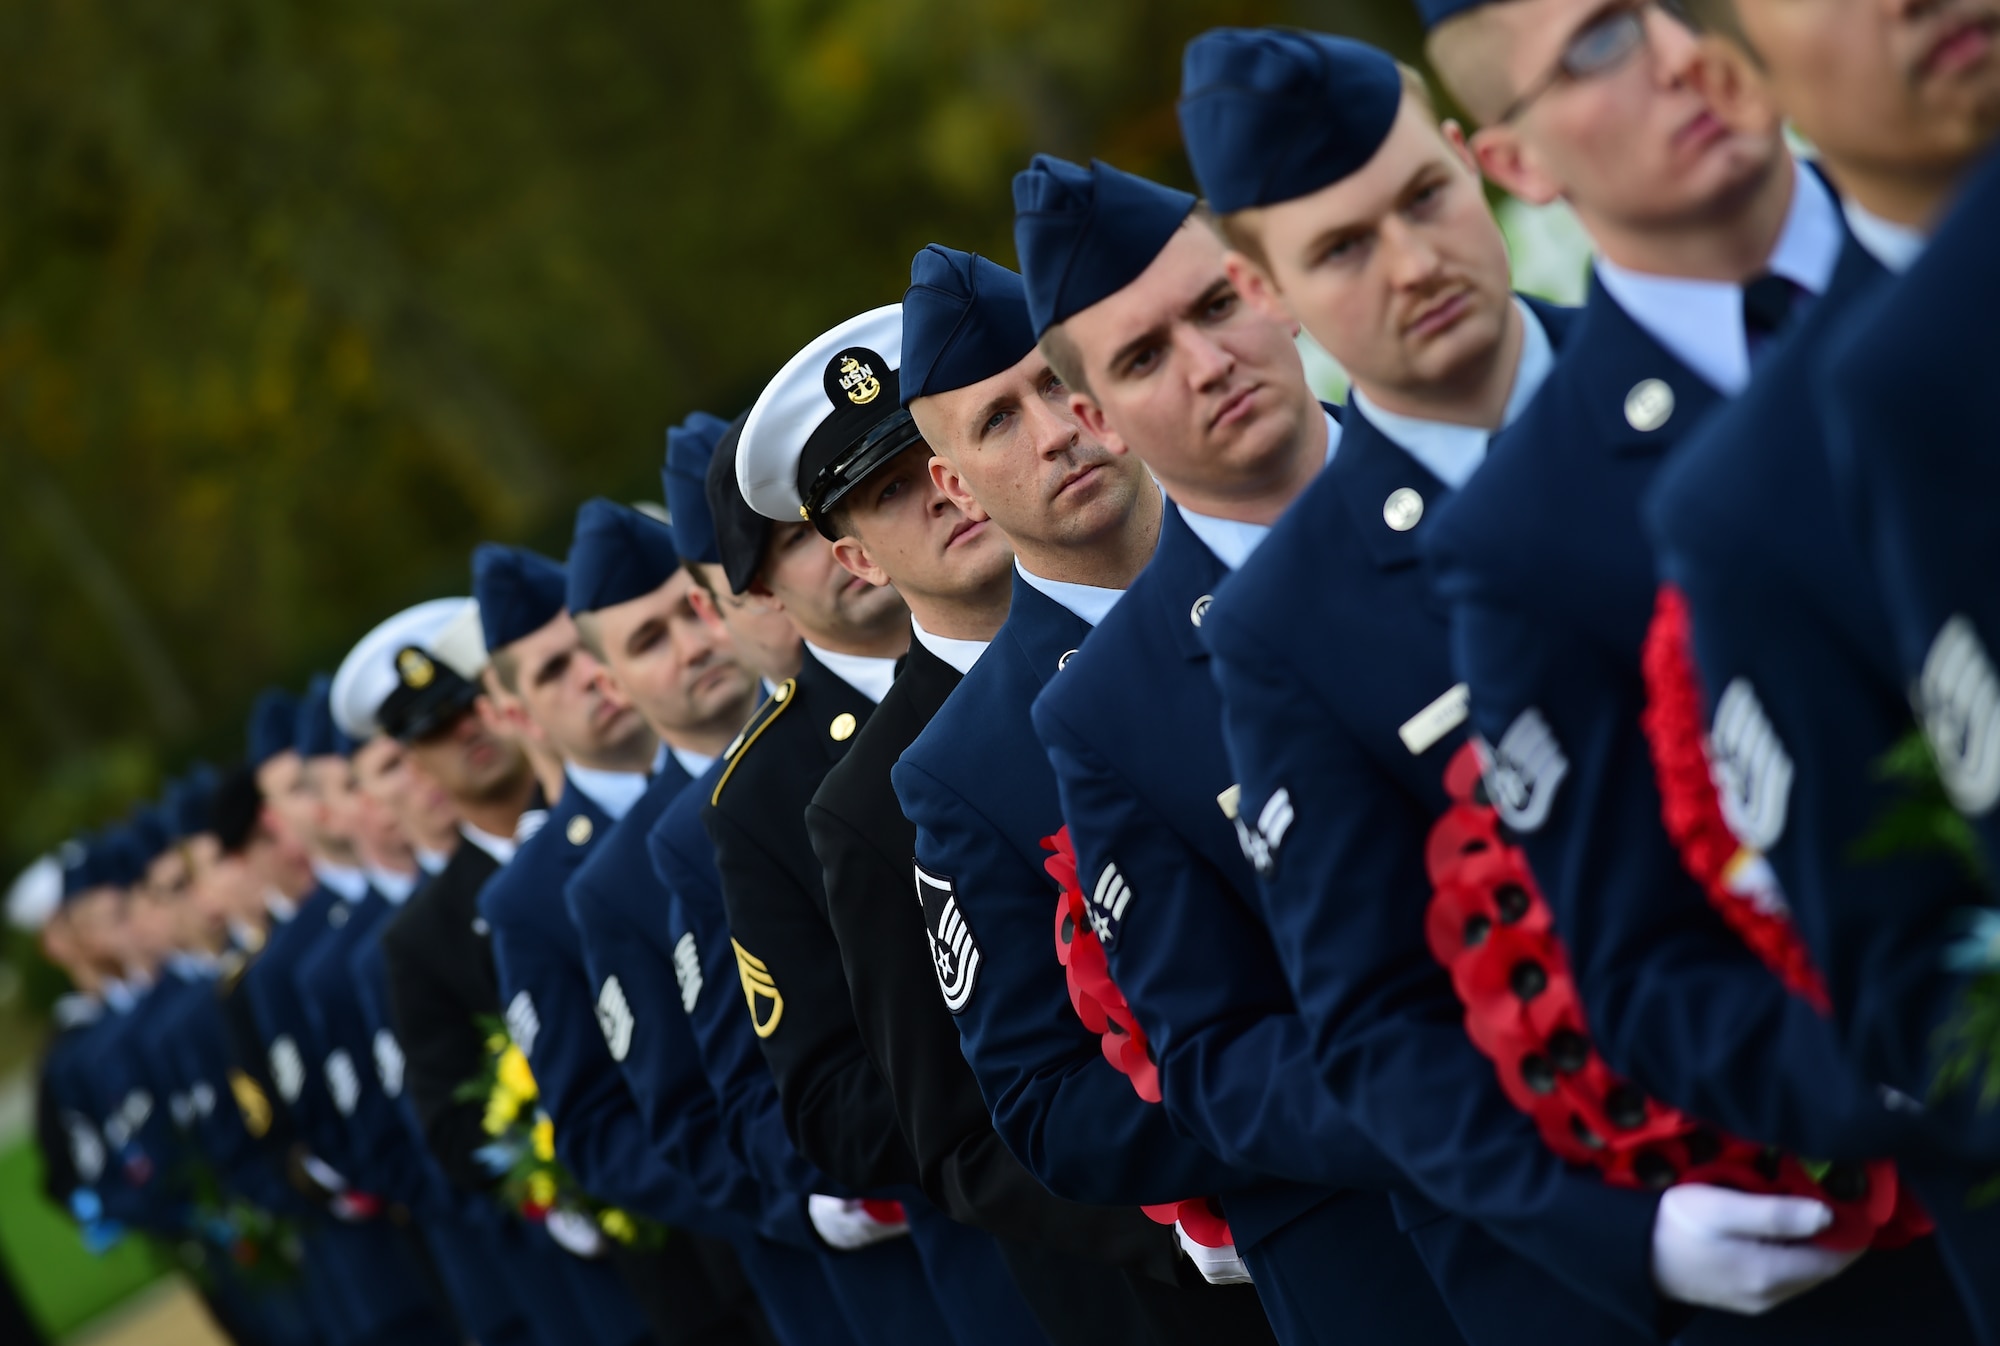 Service members from the Department of Defense, carry wreaths during the Veterans Day ceremony at Cambridge American Cemetery, United Kingdom, Nov. 11, 2015. The wreaths were laid in honor the military members past and present. (U.S. Air Force photo by Master Sgt. Chrissy Best/Released)